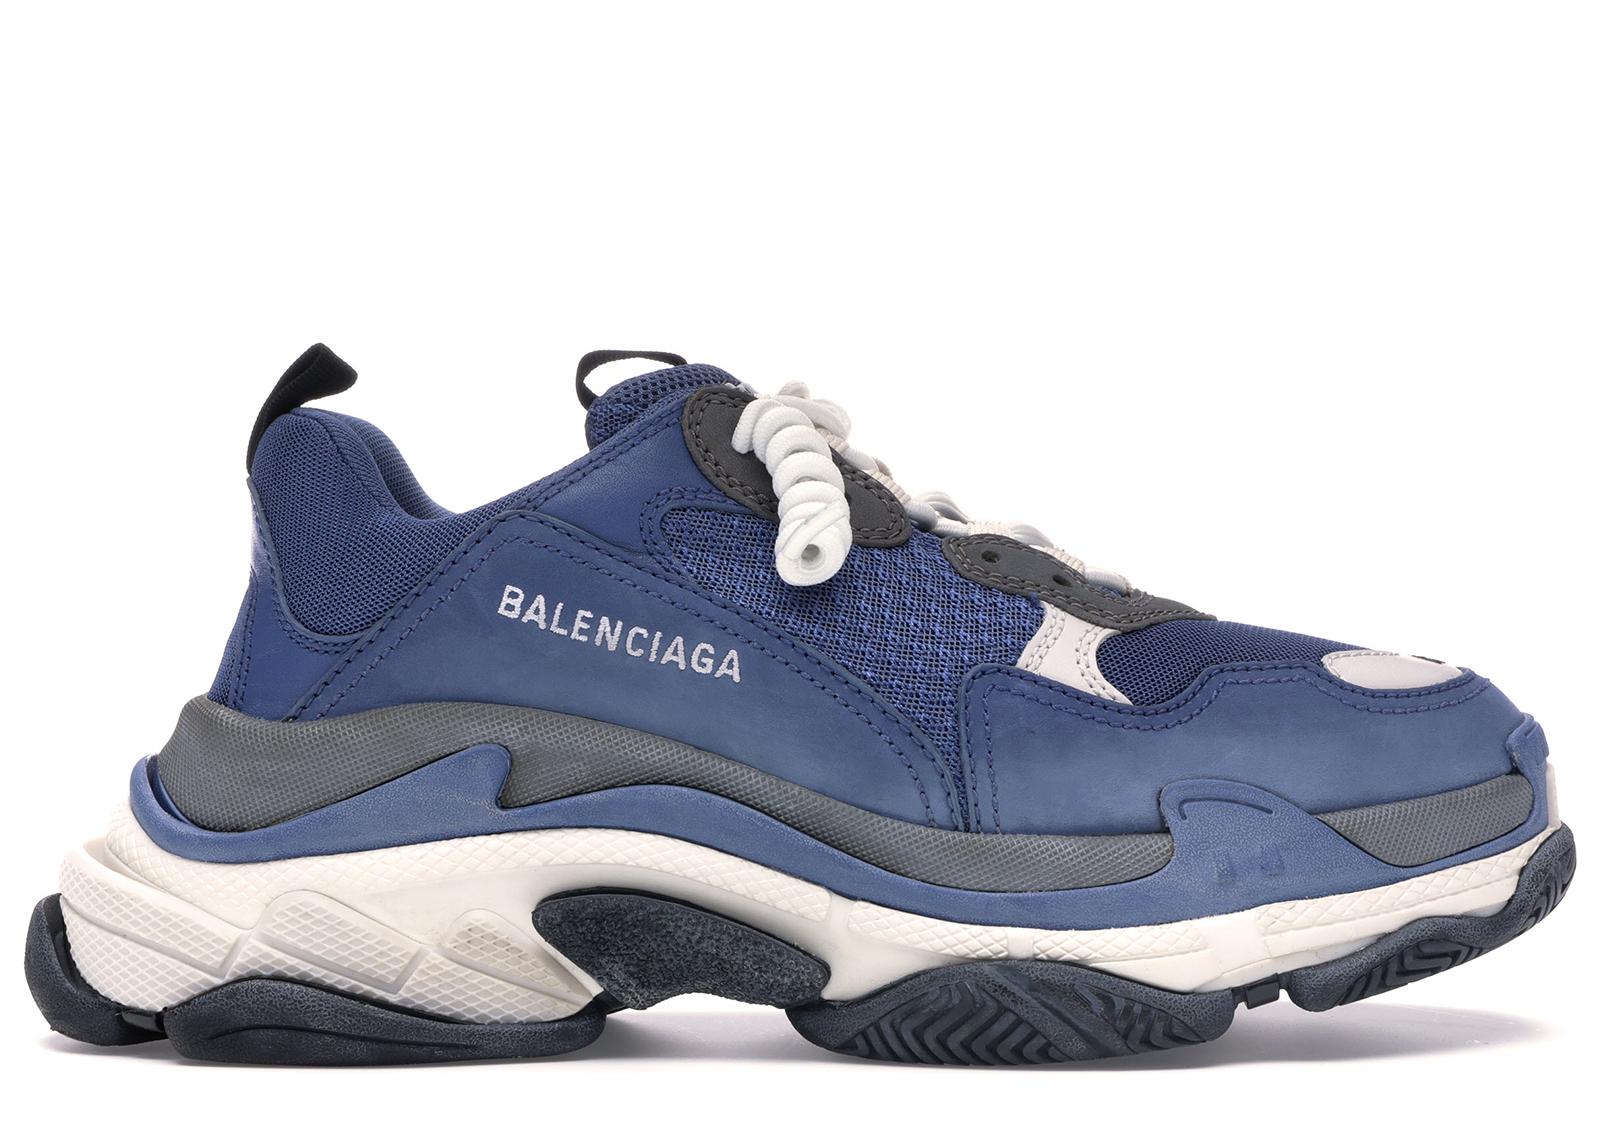 Balenciaga Triple S clear sole verte Sold out Vinted